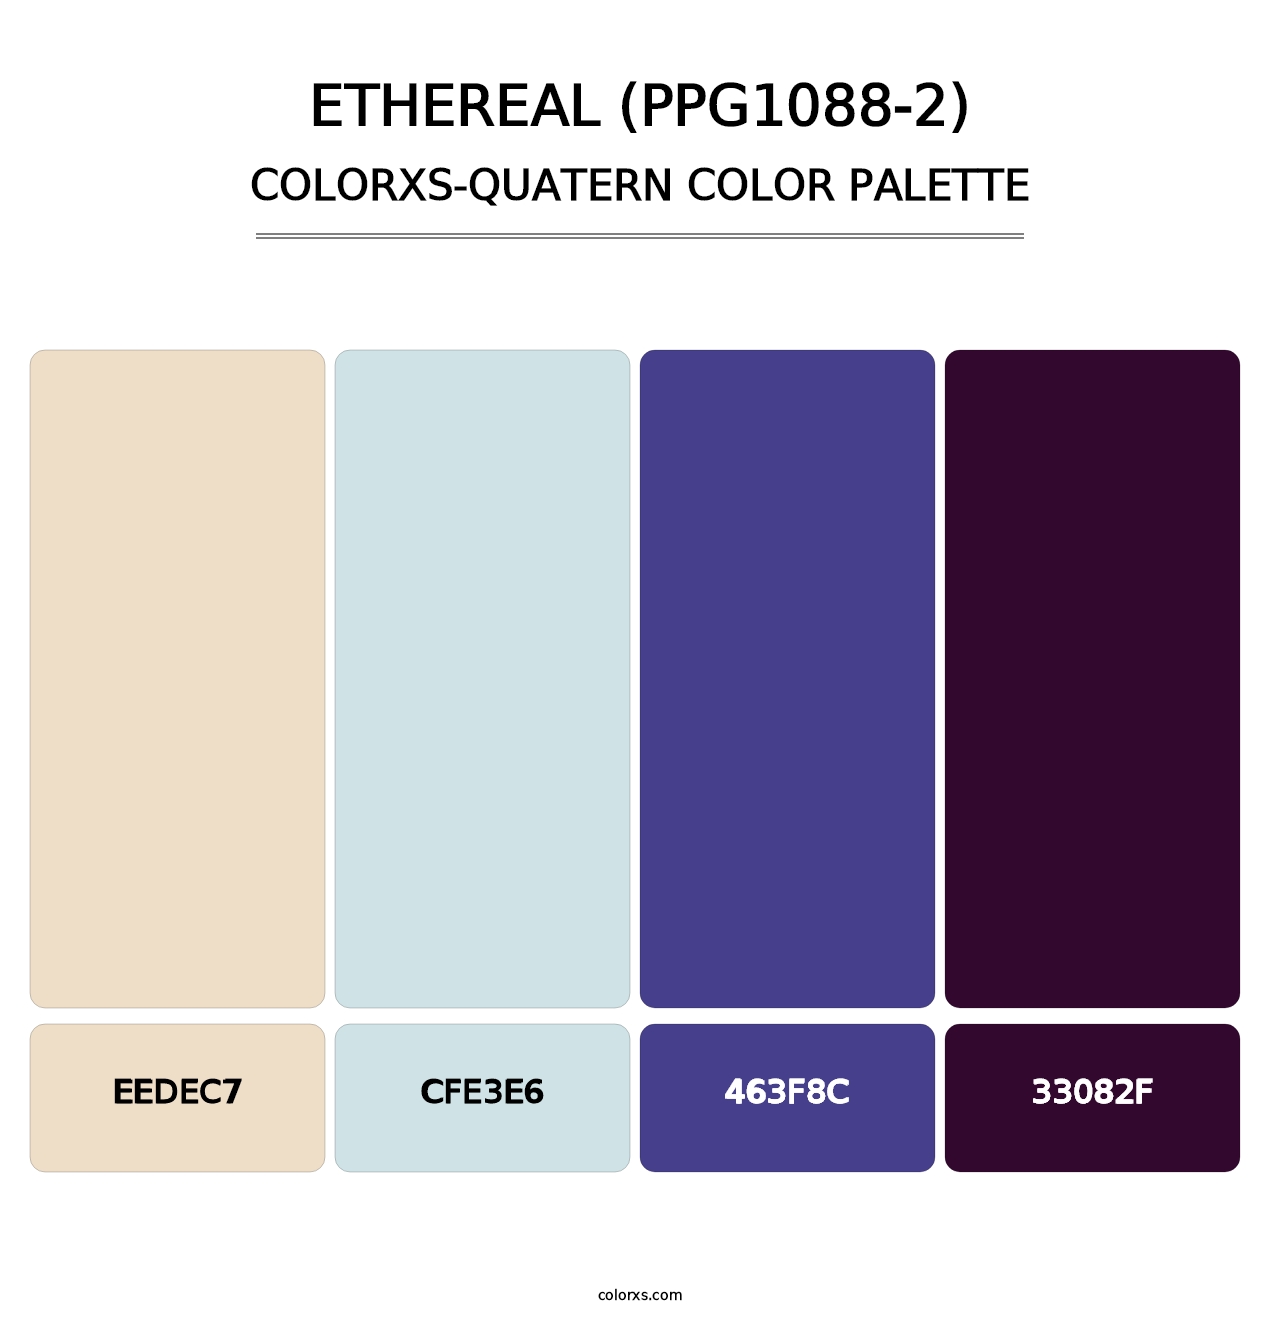 Ethereal (PPG1088-2) - Colorxs Quatern Palette